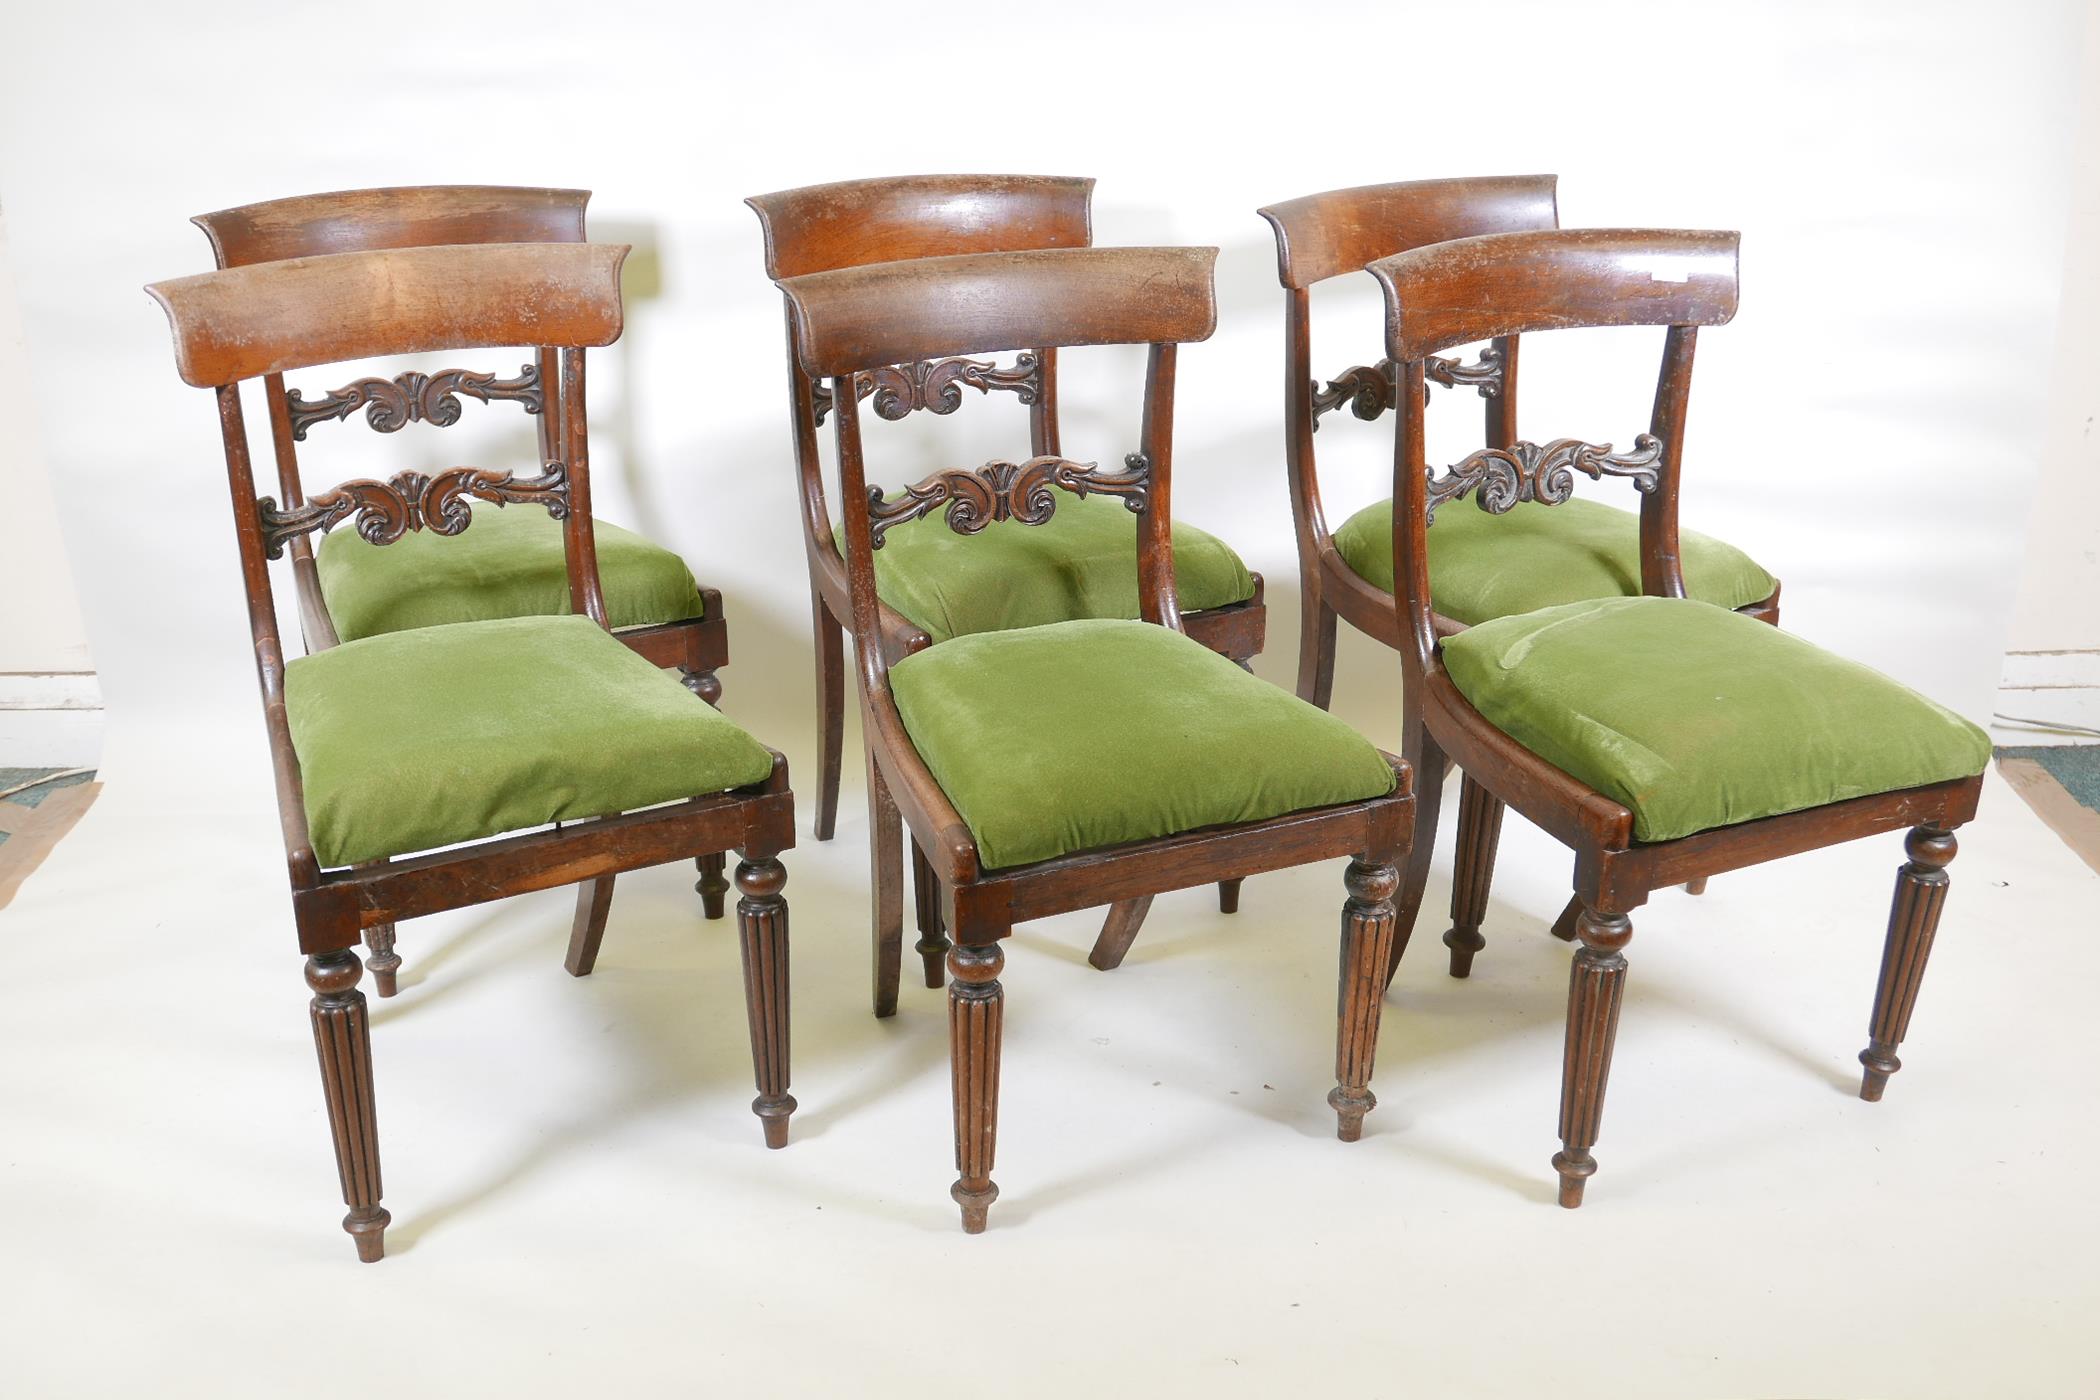 A set of six Regency/William IV rosewood dining chairs with carved back splats, stamped with maker's